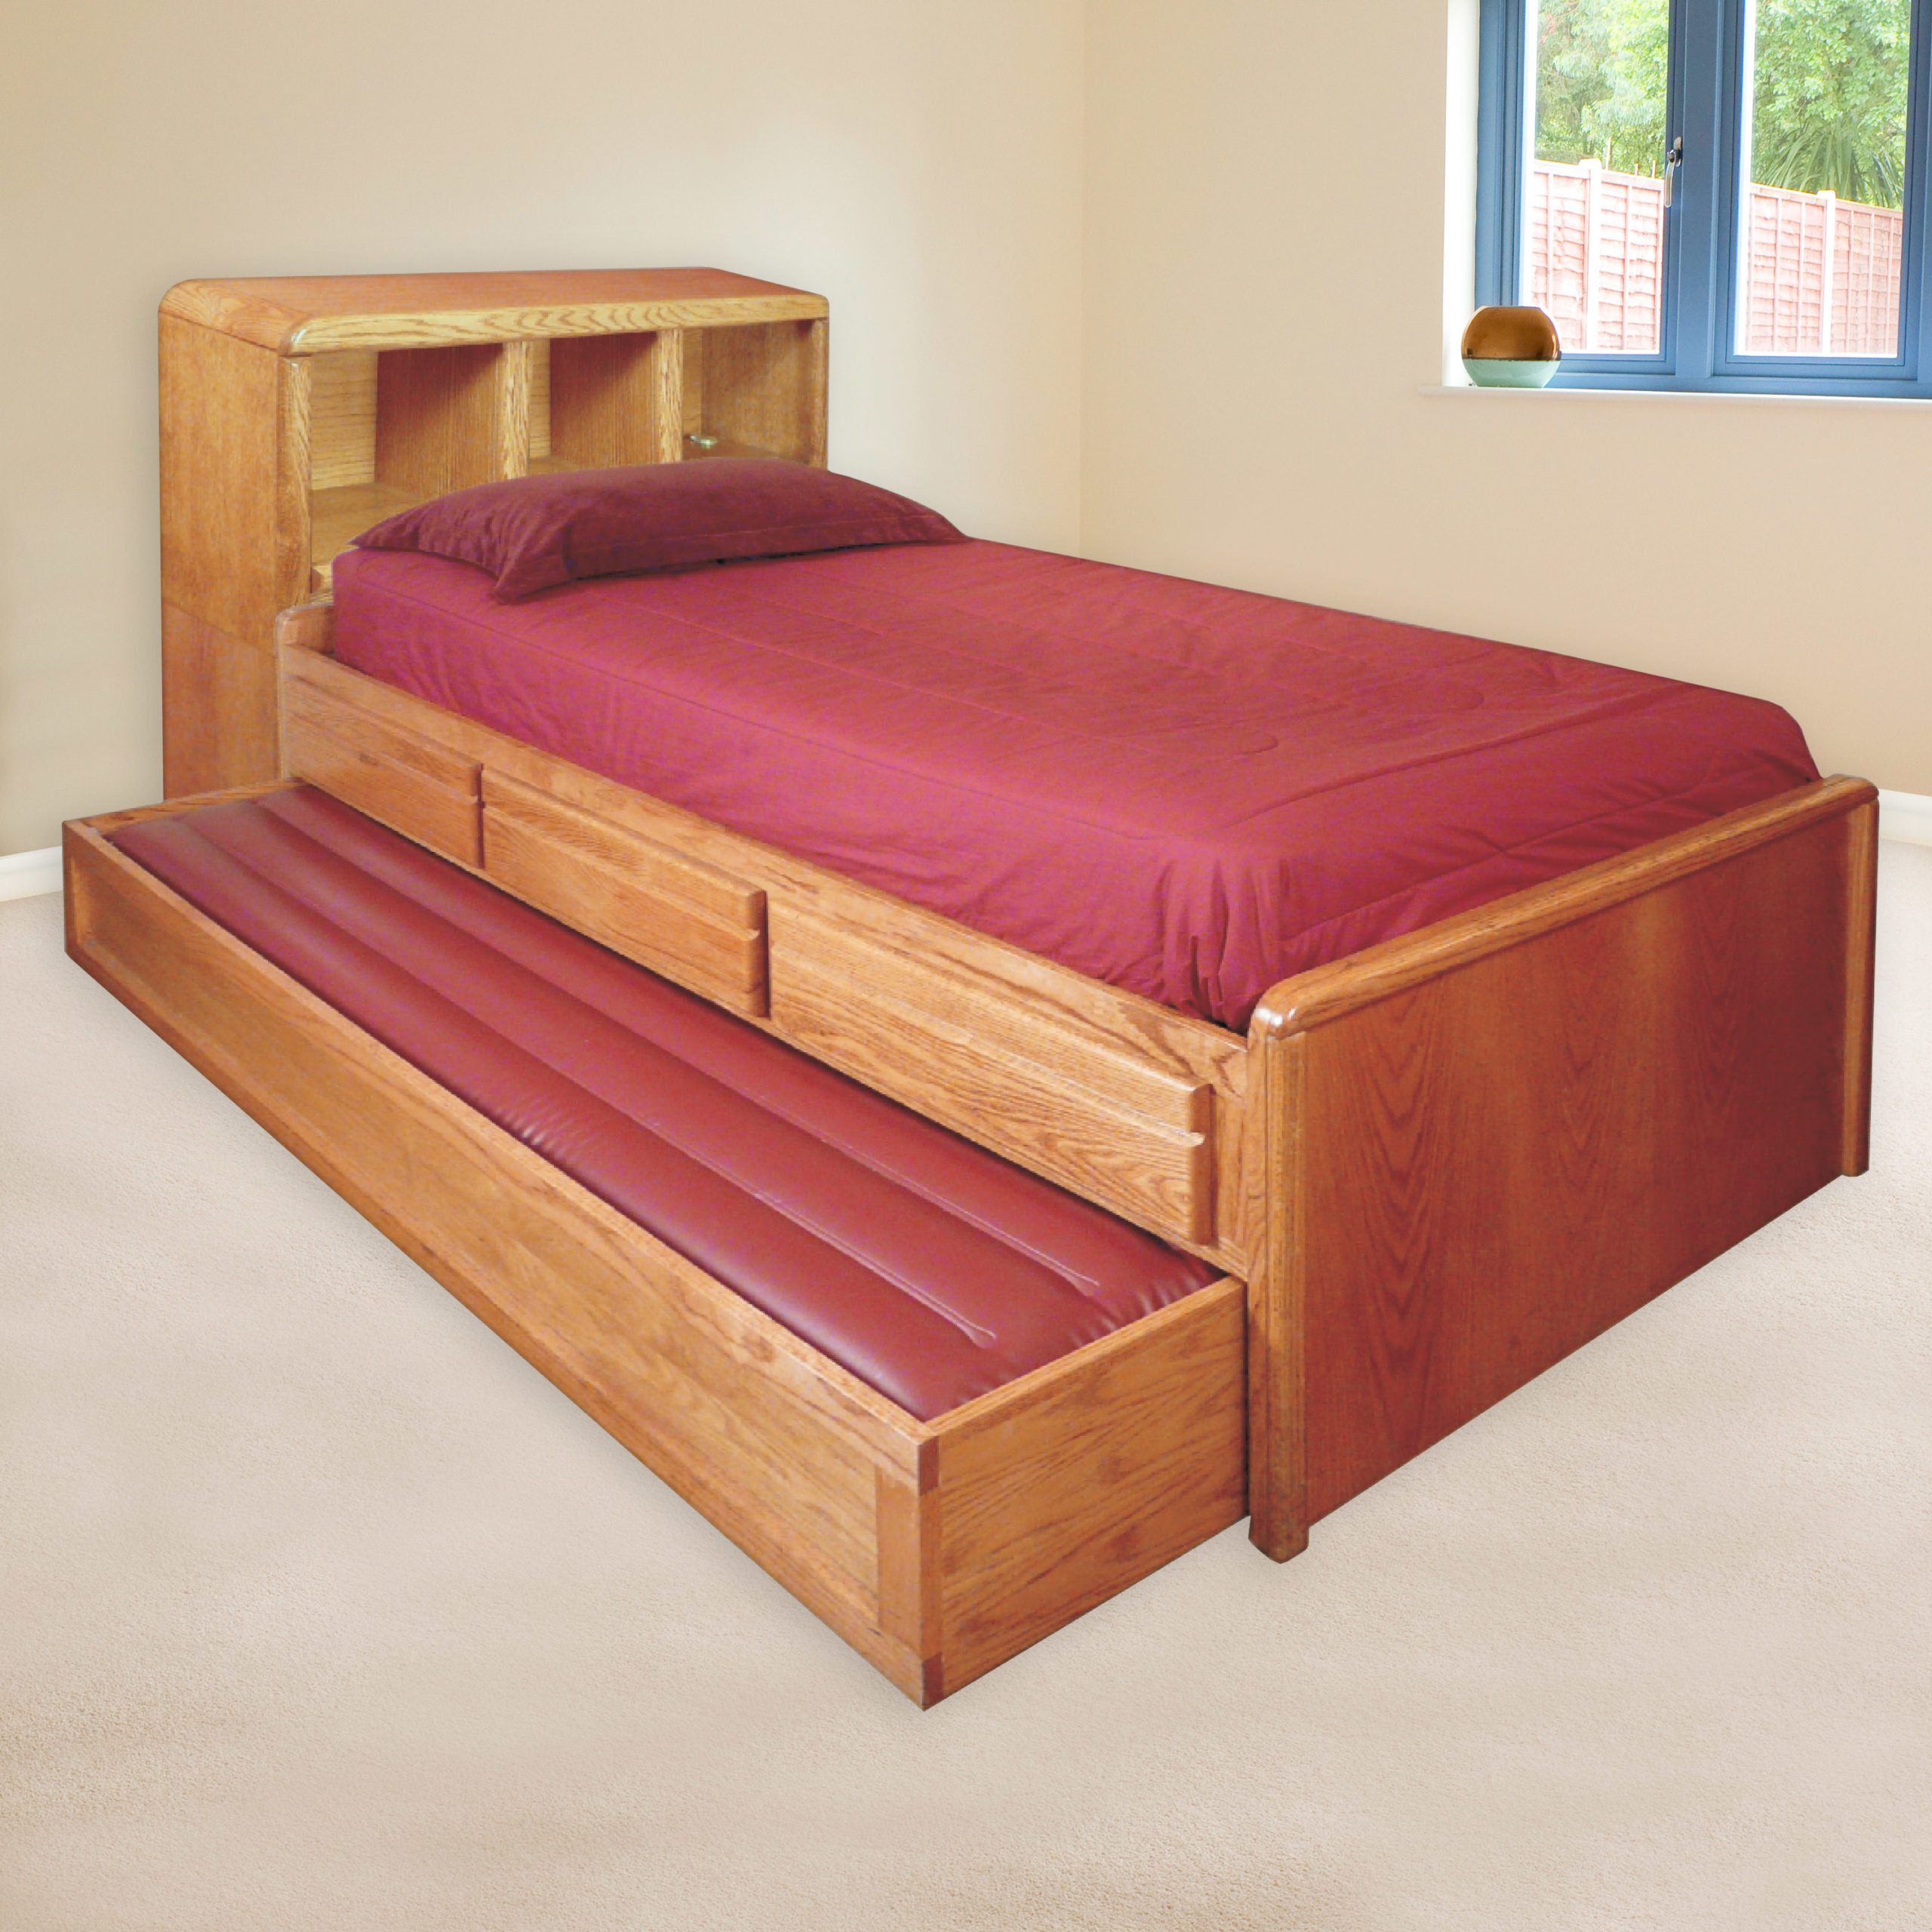 Bookcase Trundle Bed With La Jolla, Twin Bed With Bookcase Headboard And Trundle